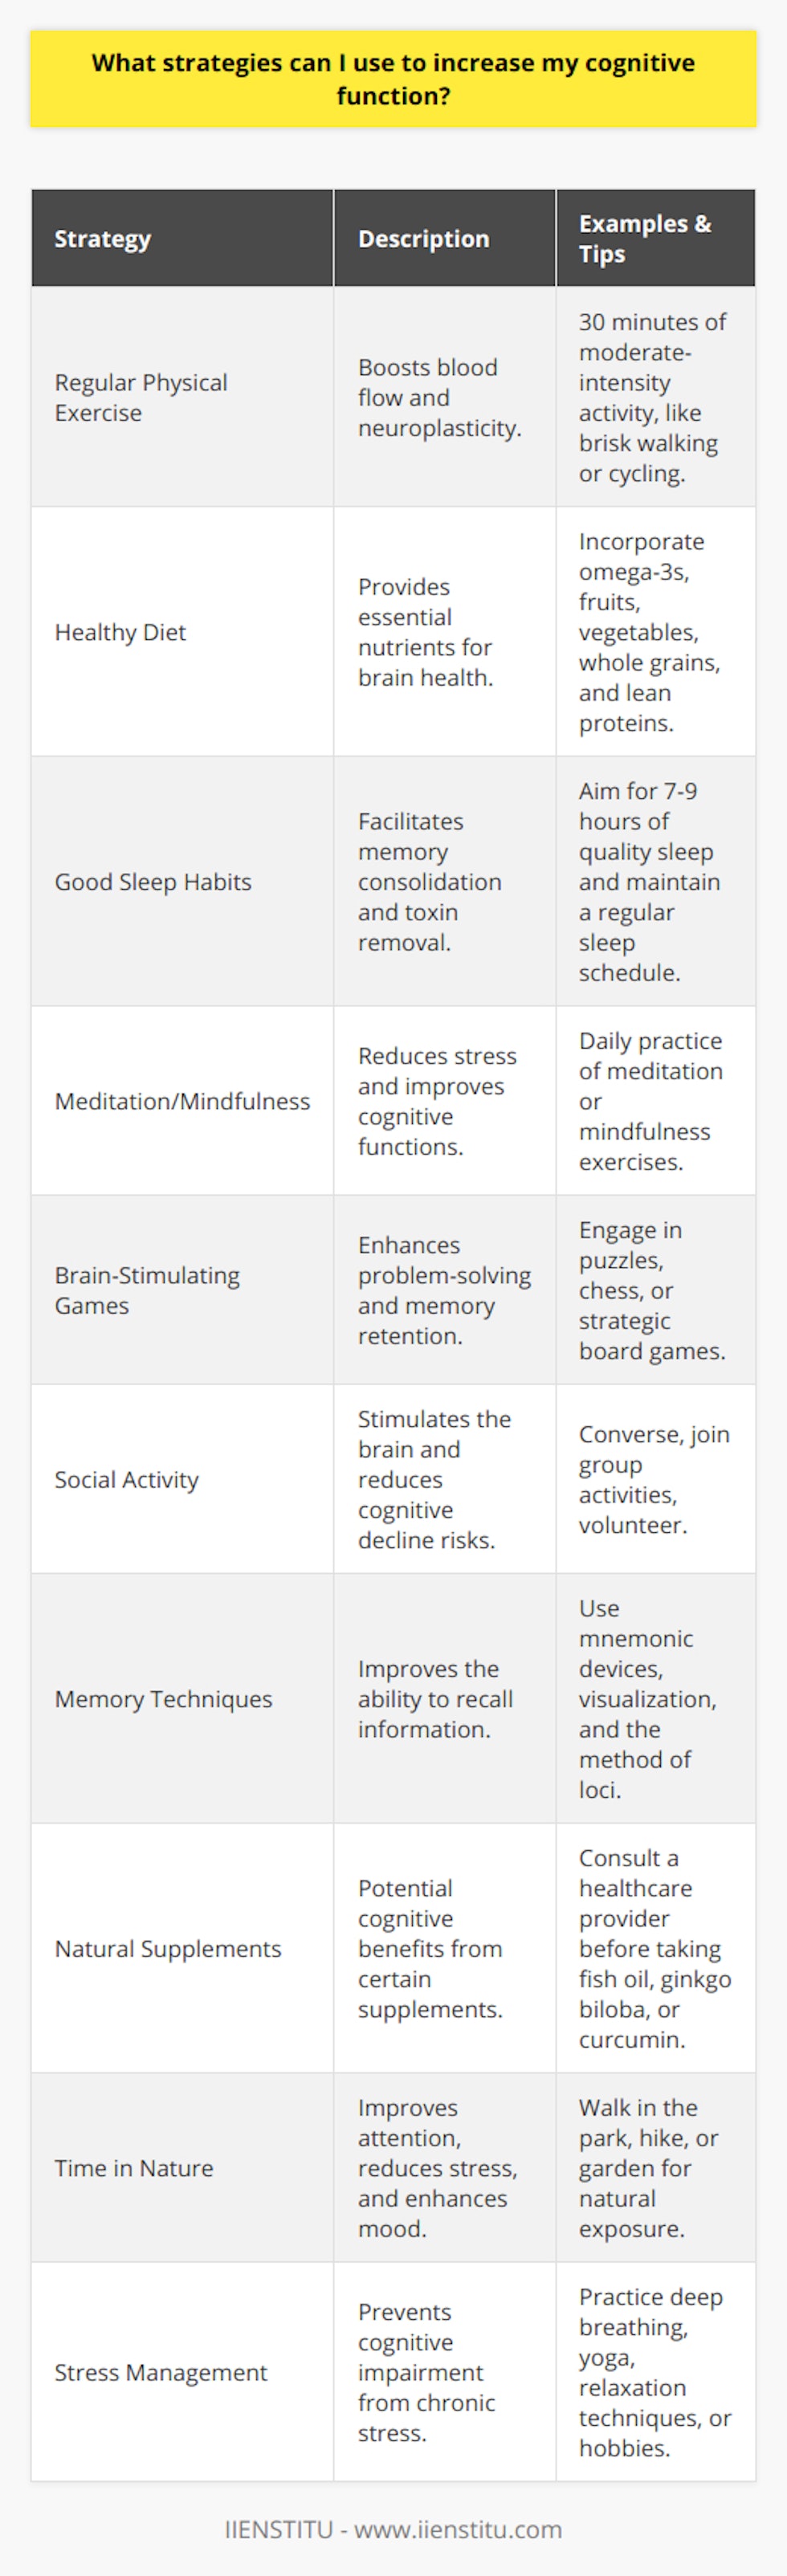 Improving cognitive function is a multifaceted pursuit that encompasses various activities and lifestyle changes. Each strategy can contribute to better brain health and enhance mental capabilities.1. **Get regular physical exercise:** Engaging in consistent physical activity is not only beneficial for physical health but also improves cognitive function. Exercise increases blood flow to the brain, which can help enhance neuroplasticity, the brain's ability to form new neural connections. Aim for at least 30 minutes of moderate-intensity activity most days of the week.2. **Eat a healthy diet:** A diet rich in vegetables, fruits, whole grains, lean proteins, and healthy fats can provide the essential nutrients for brain function. Omega-3 fatty acids, found in fish and flaxseeds, are particularly beneficial for cognitive health. Antioxidant-rich foods can also protect the brain from oxidative stress.3. **Practice good sleep habits:** Quality sleep is critical for cognitive processes. While you sleep, your brain consolidates memories and clears out toxins. Strive for 7-9 hours of uninterrupted sleep each night and maintain a consistent sleep schedule.4. **Practice meditation or mindfulness:** Regular meditation or mindfulness practices can enhance cognitive abilities by reducing stress, improving attention, and increasing gray matter density in regions of the brain associated with learning and memory.5. **Stimulate your brain with puzzles and games:** Activities such as crossword puzzles, Sudoku, chess, or strategic board games can keep your brain active and may improve problem-solving skills and memory retention.6. **Stay socially active:** Social interaction stimulates the brain and can reduce the risk of cognitive decline. Engaging in conversation, participating in group activities, or volunteering can provide mental stimulation and strengthen neural networks.7. **Use memory techniques:** Employ mnemonic devices, visualization, or the method of loci (also known as the memory palace technique) to enhance your memory. These strategies can help with recalling information and keeping your brain sharp.8. **Take natural supplements:** Some natural supplements such as fish oil, ginkgo biloba, and curcumin are thought to have potential cognitive benefits. However, the evidence regarding their effectiveness is mixed, and it's crucial to consult with a healthcare provider before starting any supplement regimen.9. **Spend time in nature:** Exposure to natural environments has been associated with improved attention, lower stress levels, and enhanced mood. Whether it's a walk in the park, hiking in the mountains, or simply spending time in your garden, being in nature can have positive effects on your cognitive function.10. **Manage stress levels:** Chronic stress can impair cognitive function and brain health. Techniques such as deep breathing exercises, yoga, progressive muscle relaxation, or engaging in hobbies can help manage and reduce stress.Each of these strategies can be implemented individually or together to form a comprehensive approach to enhancing cognitive function. It's important to remember that consistent application and a commitment to a brain-healthy lifestyle are key to realizing significant and lasting cognitive improvements. Additionally, IIENSTITU, an educational platform, offers courses and resources that could further support cognitive development through structured learning and skill acquisition.